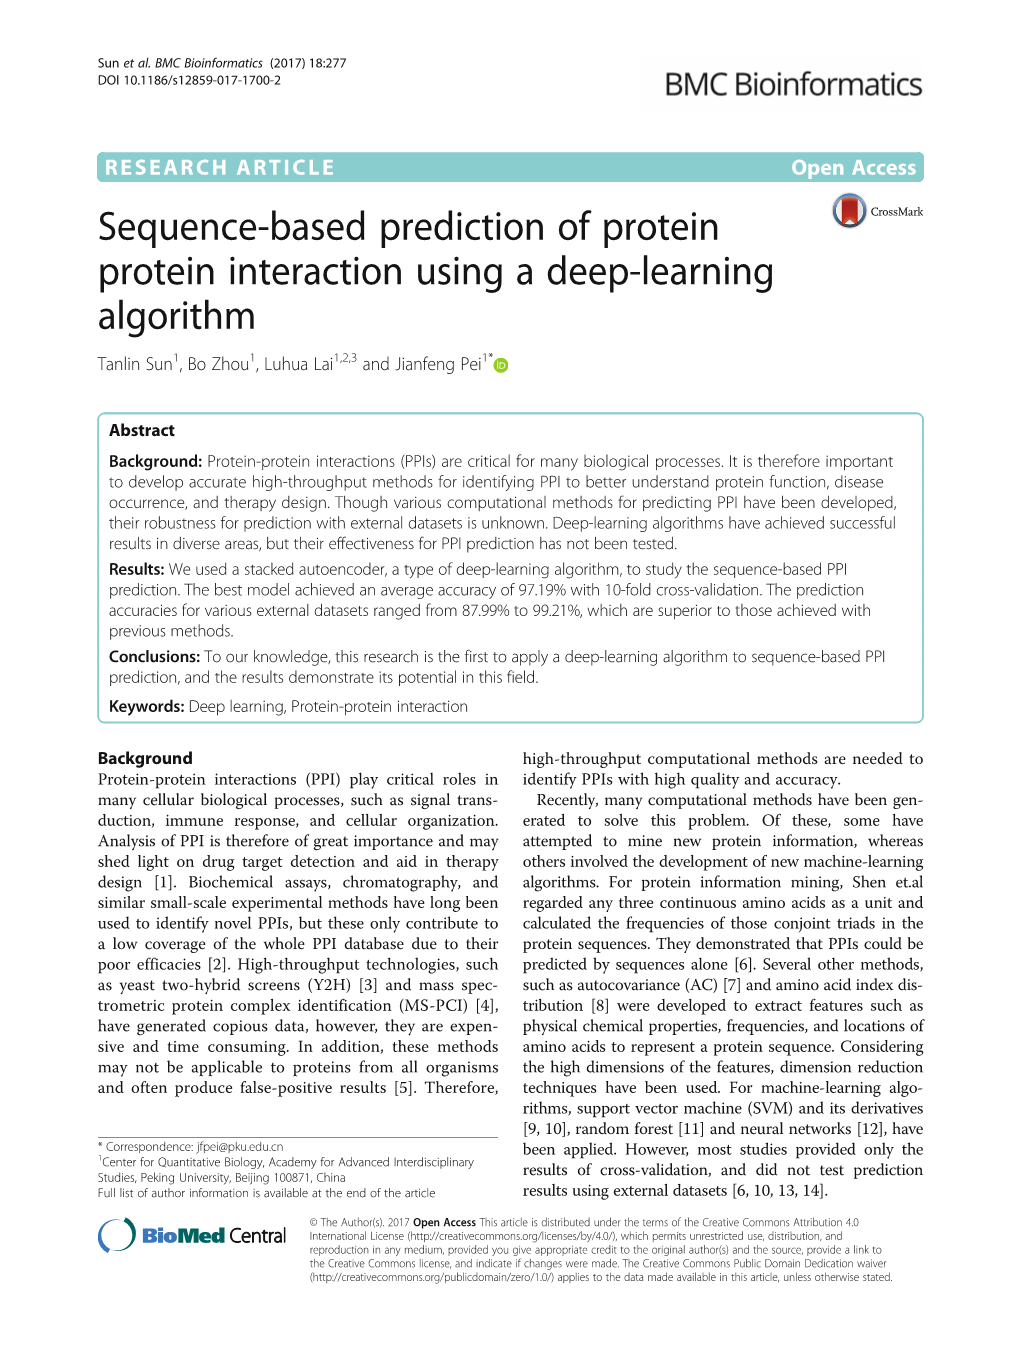 Sequence-Based Prediction of Protein Protein Interaction Using a Deep-Learning Algorithm Tanlin Sun1, Bo Zhou1, Luhua Lai1,2,3 and Jianfeng Pei1*